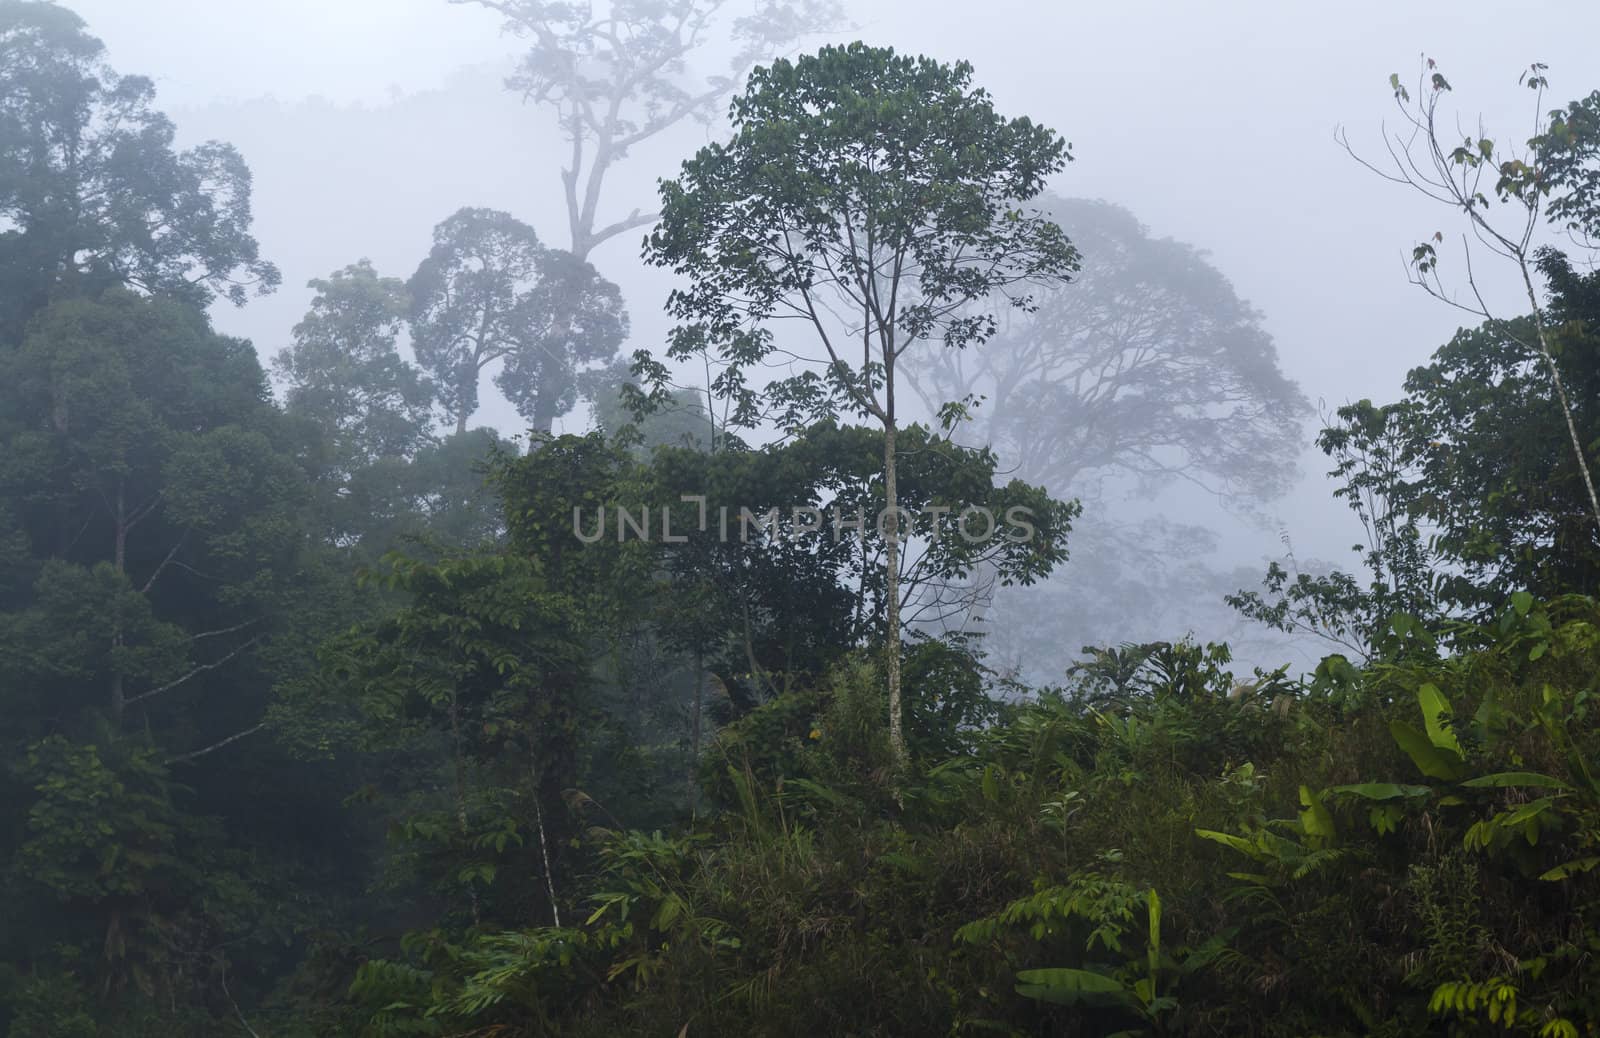 rainforest tree engulfed by the fog in the mornig light in Sarawak, Malaysia